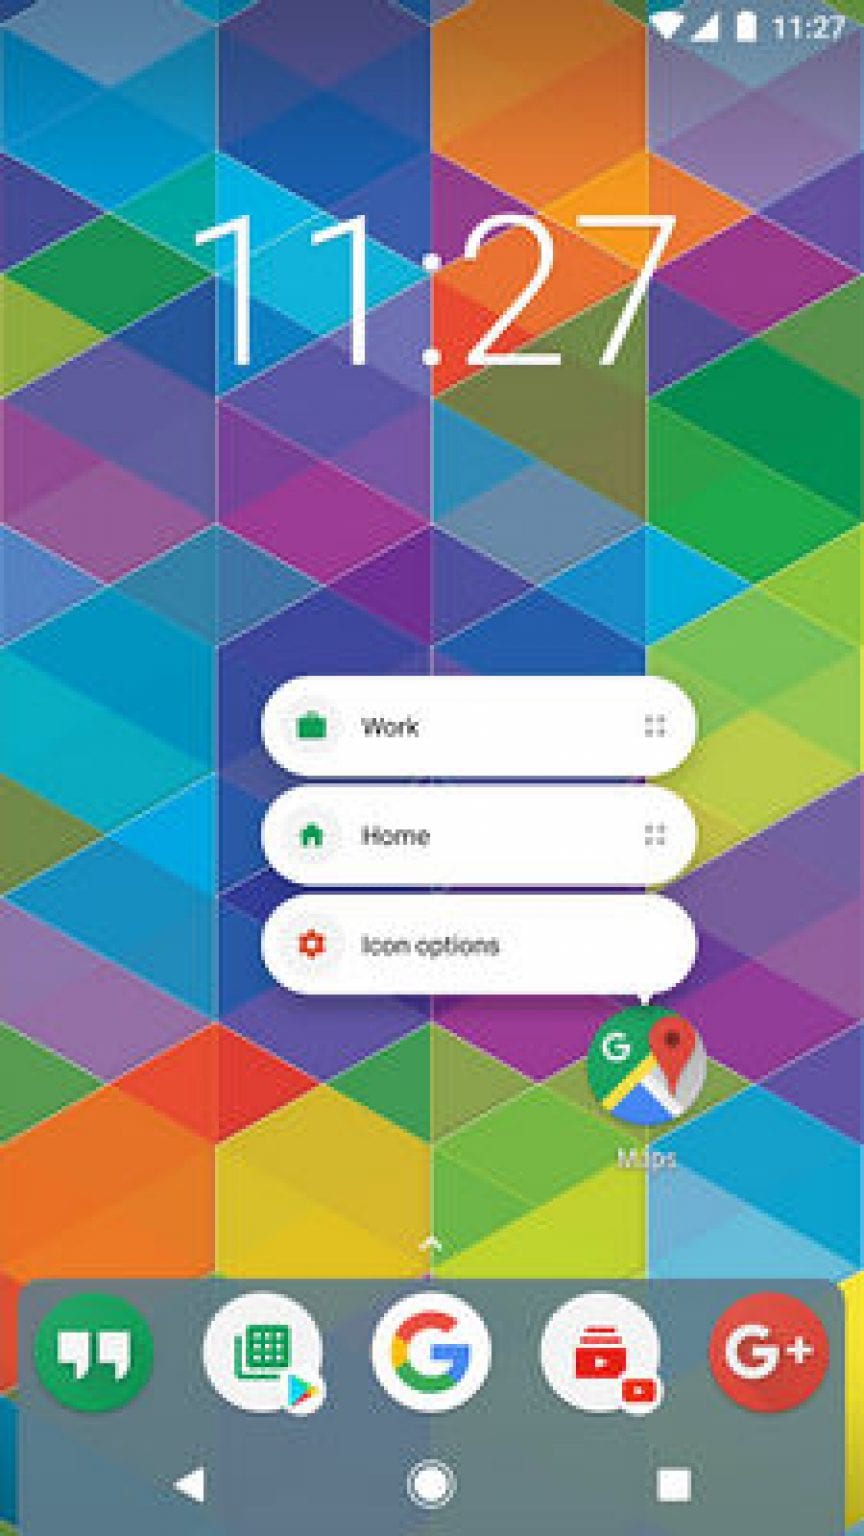 Nova Launcher2 Free apps for Android and iOS